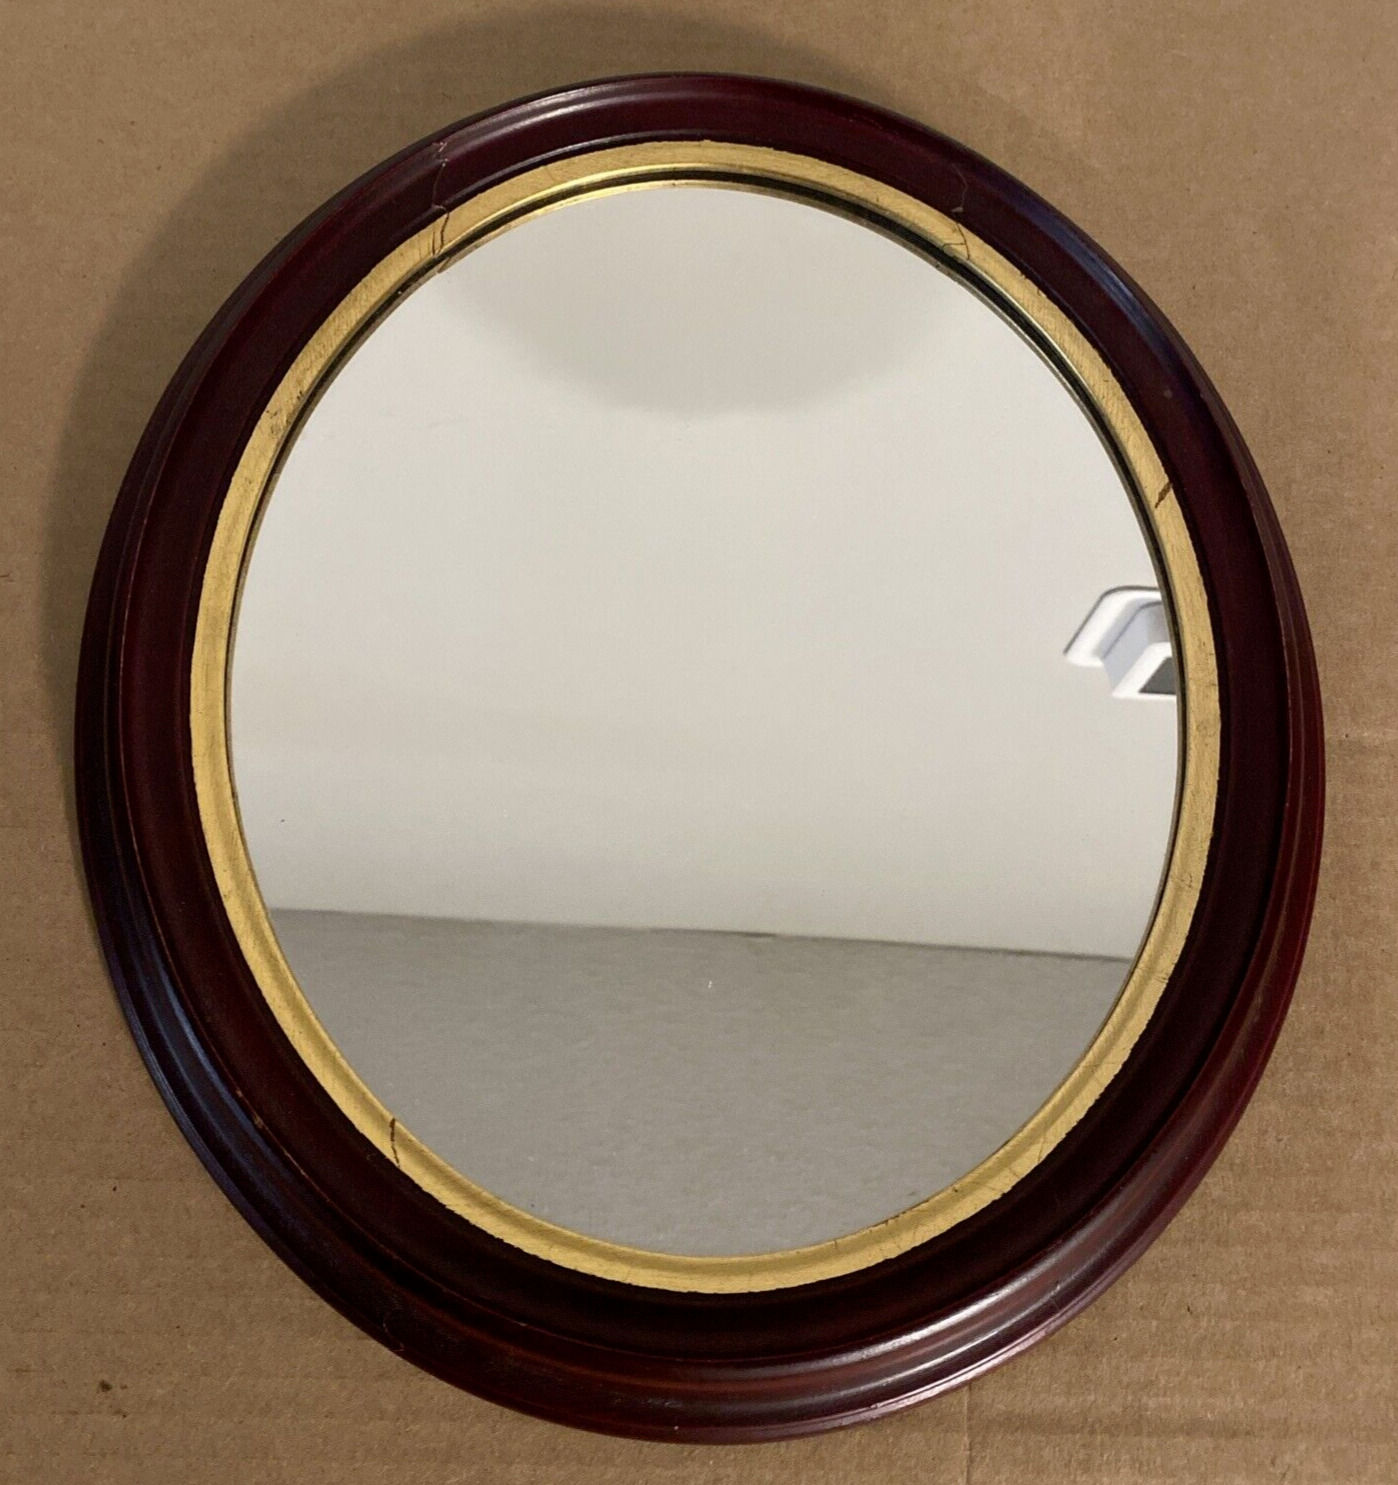 Vintage Oval Mirror Wood Framed with Gilded Edge